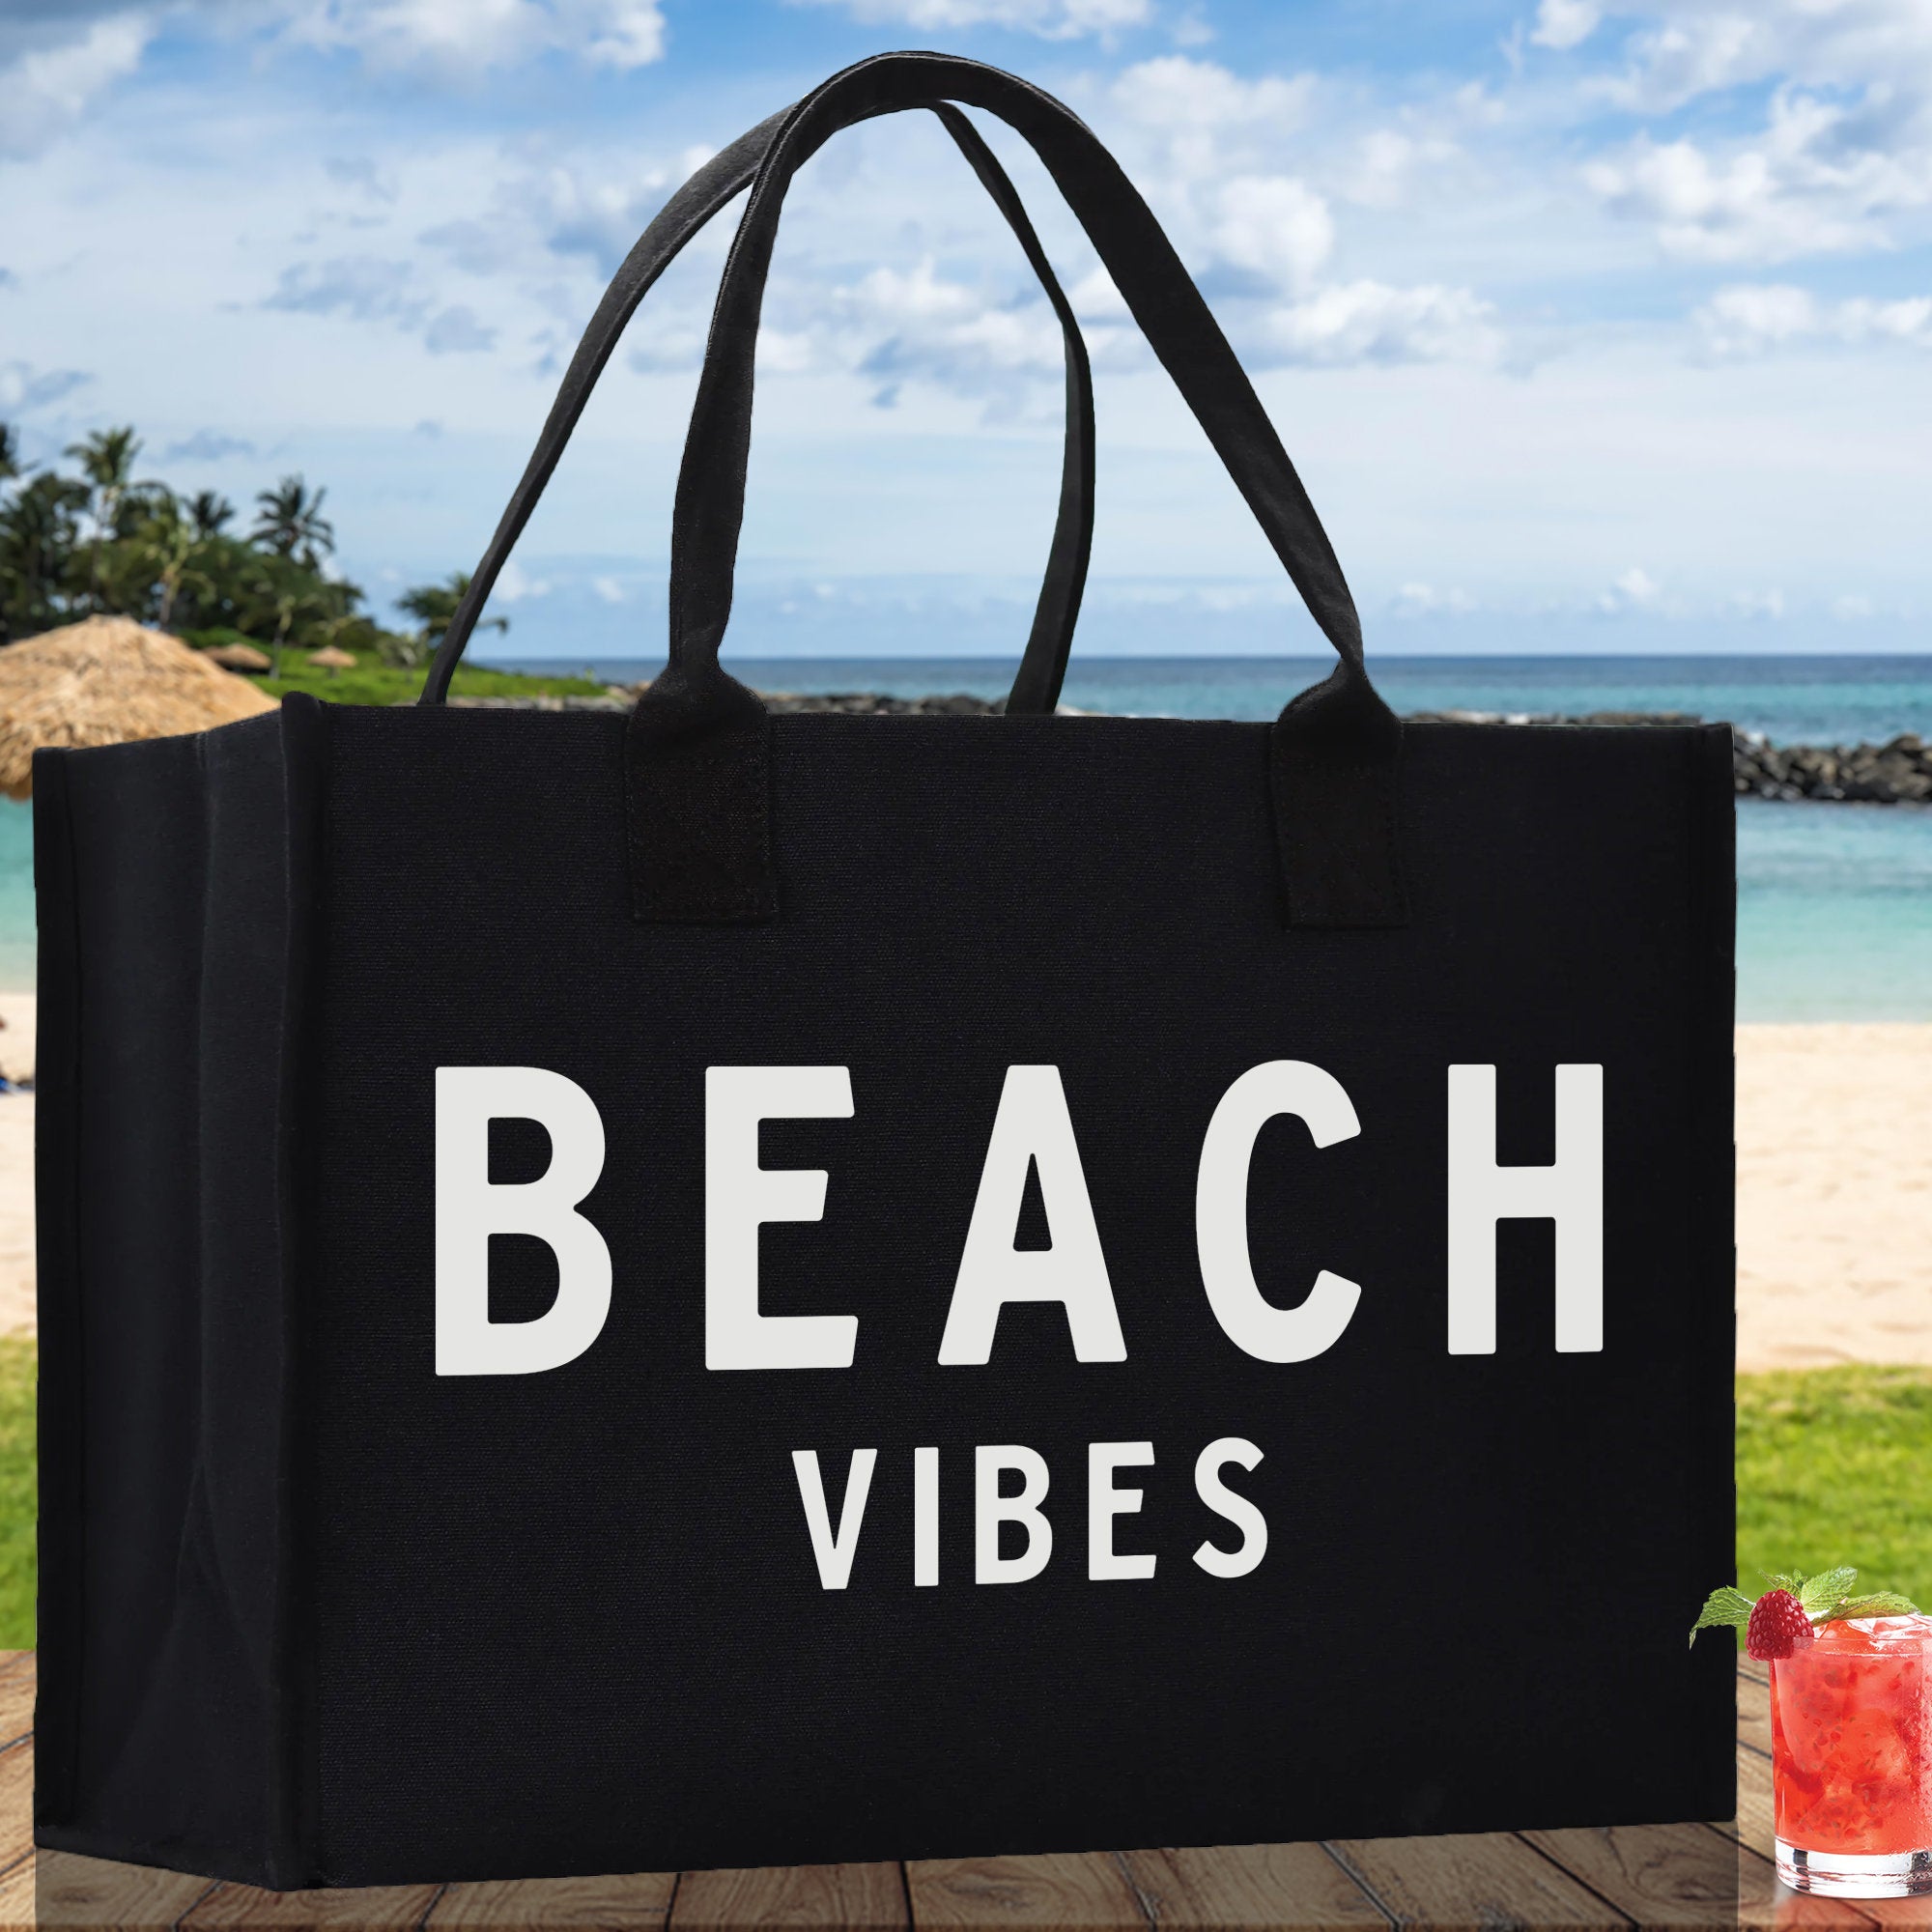 Beach Vibes Cotton Canvas Chic Beach Tote Bag Multipurpose Tote Weekender Tote Gift for Her Outdoor Tote Vacation Tote Large Beach Bag